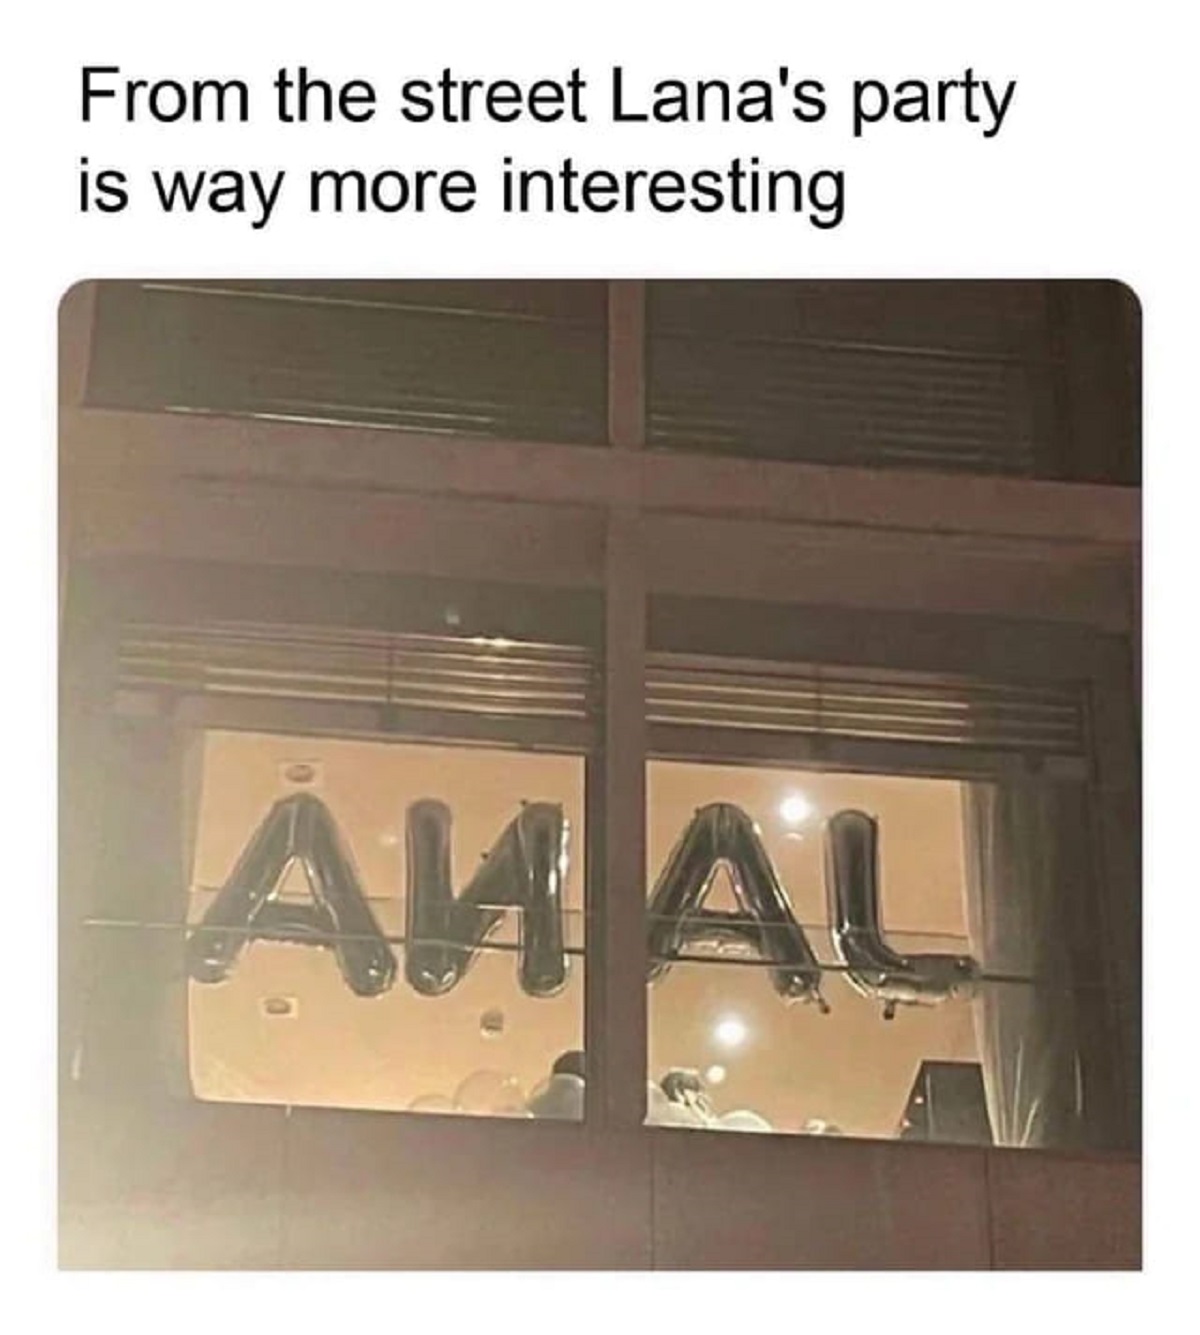 spicy memes -  lana party meme - From the street Lana's party is way more interesting Akal